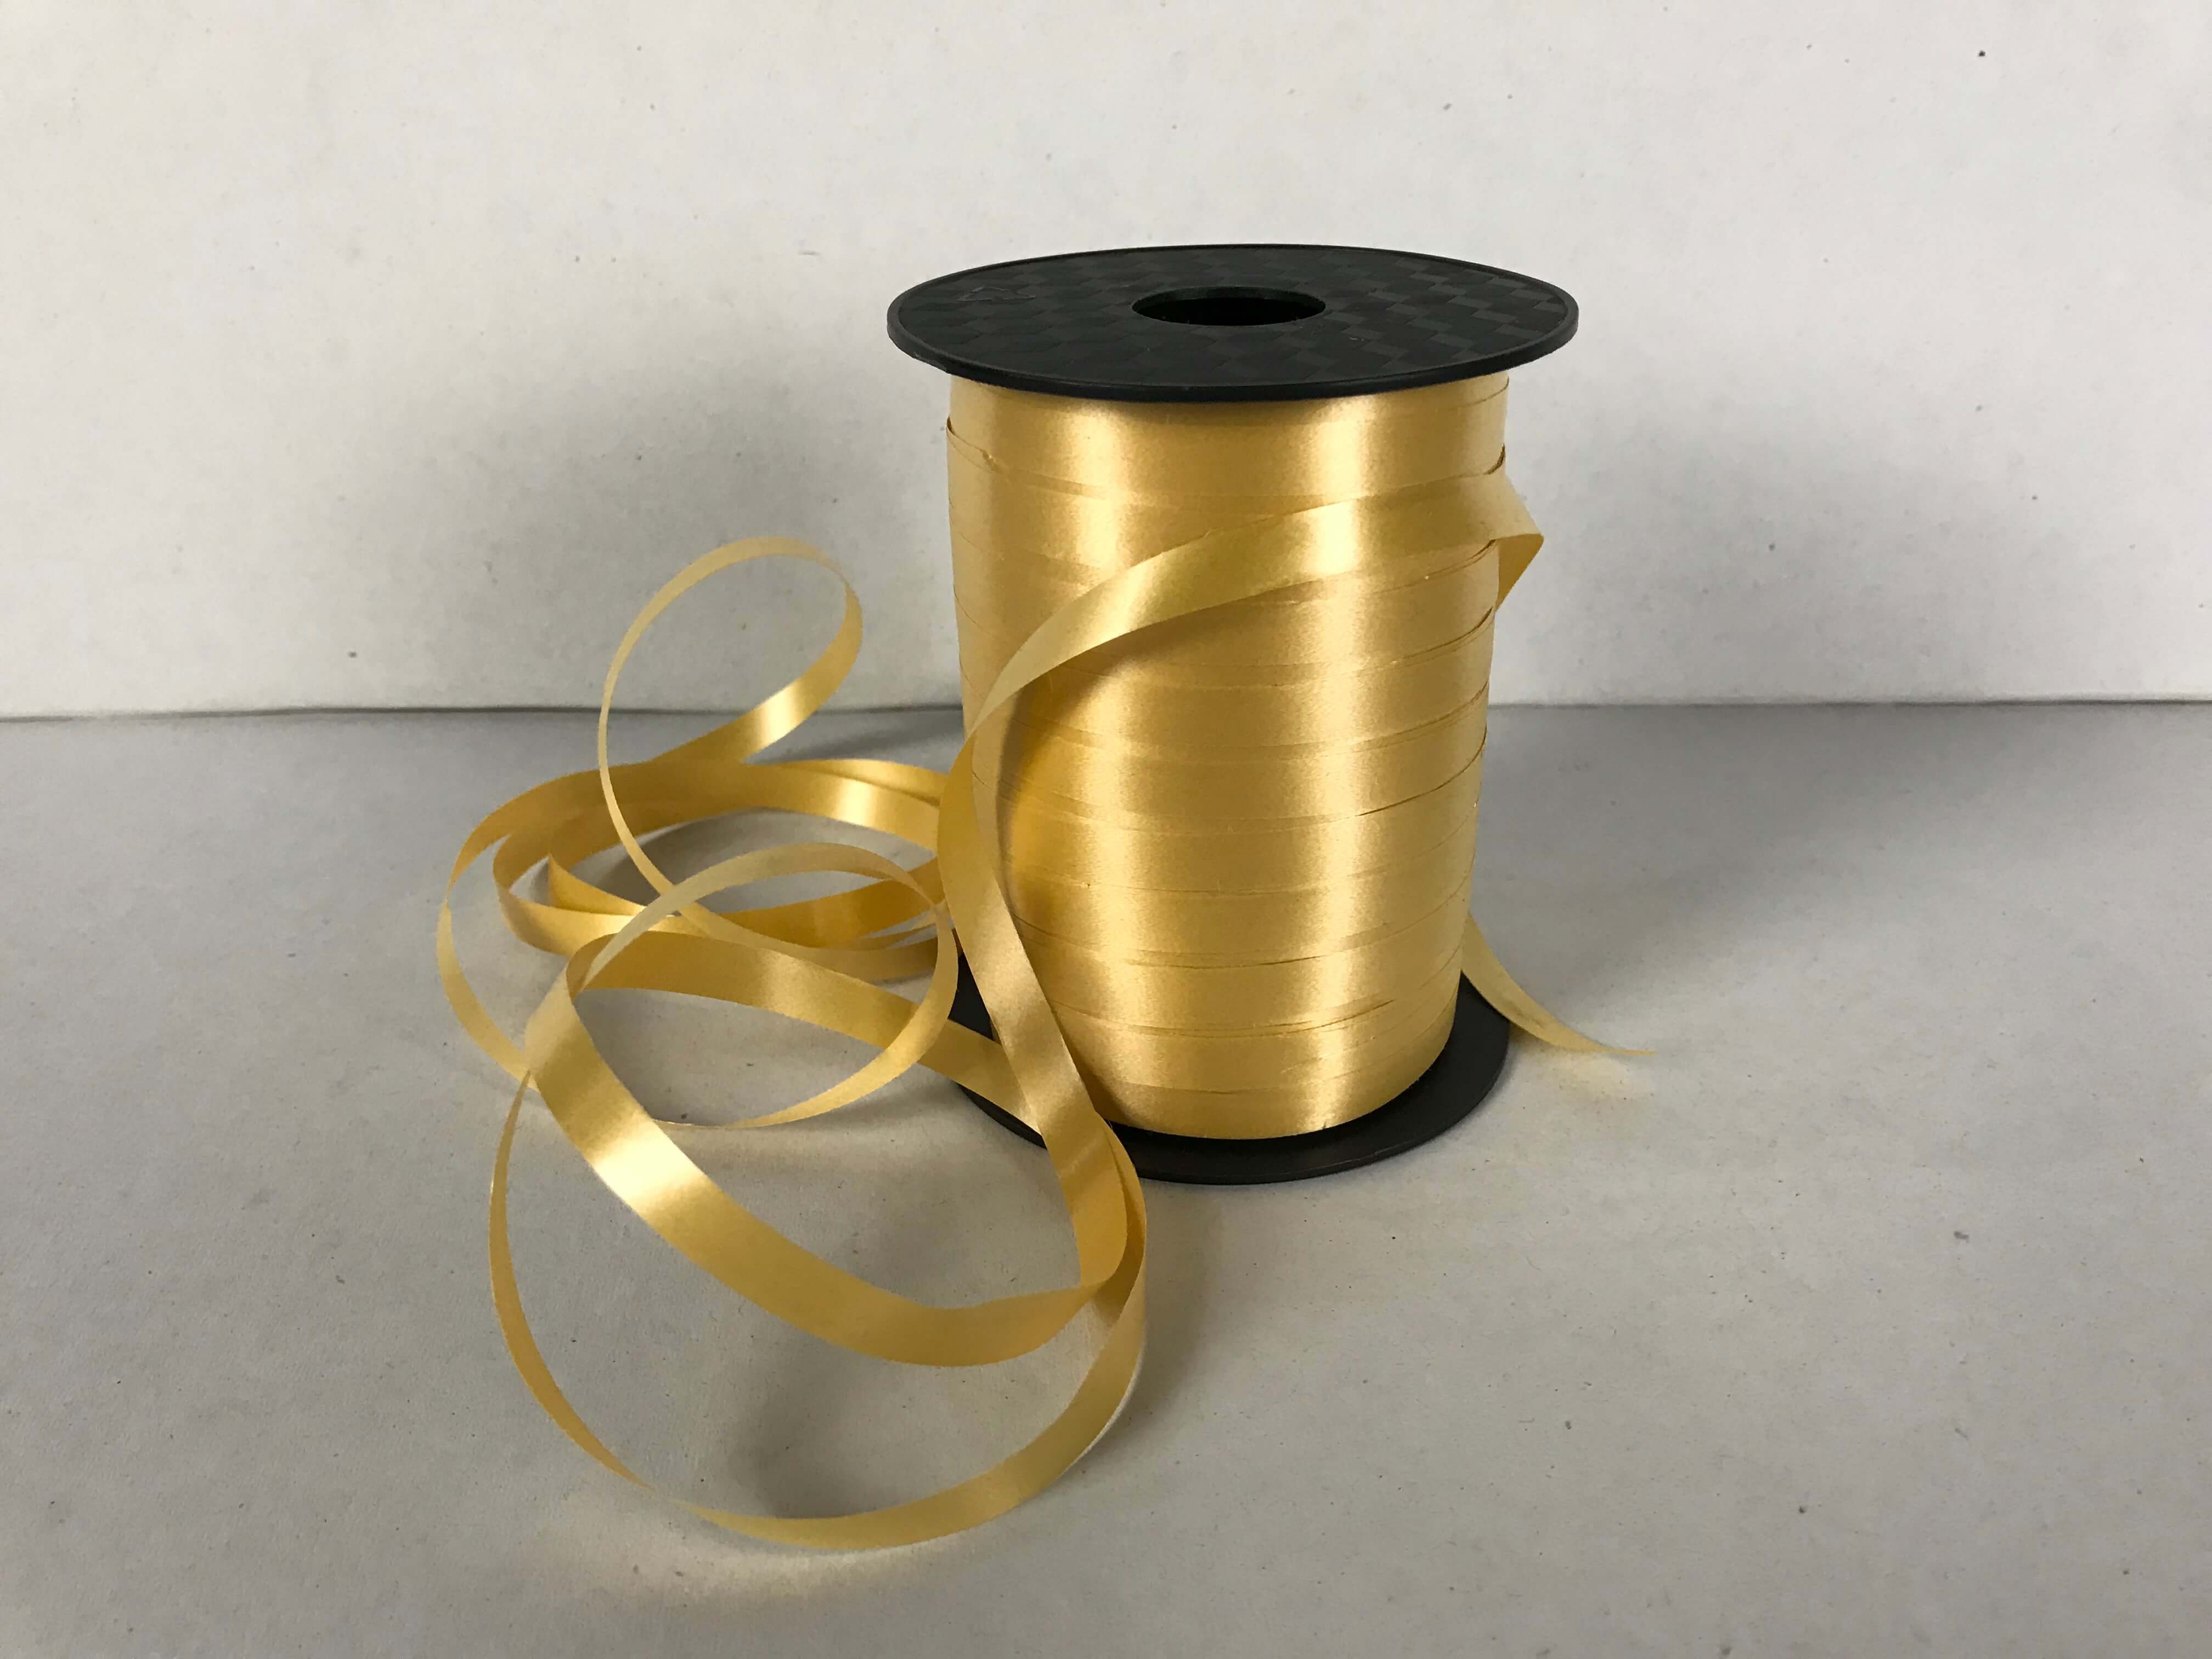 Gold curling ribbon 8mm wide in a 250 metre roll for helium balloons.